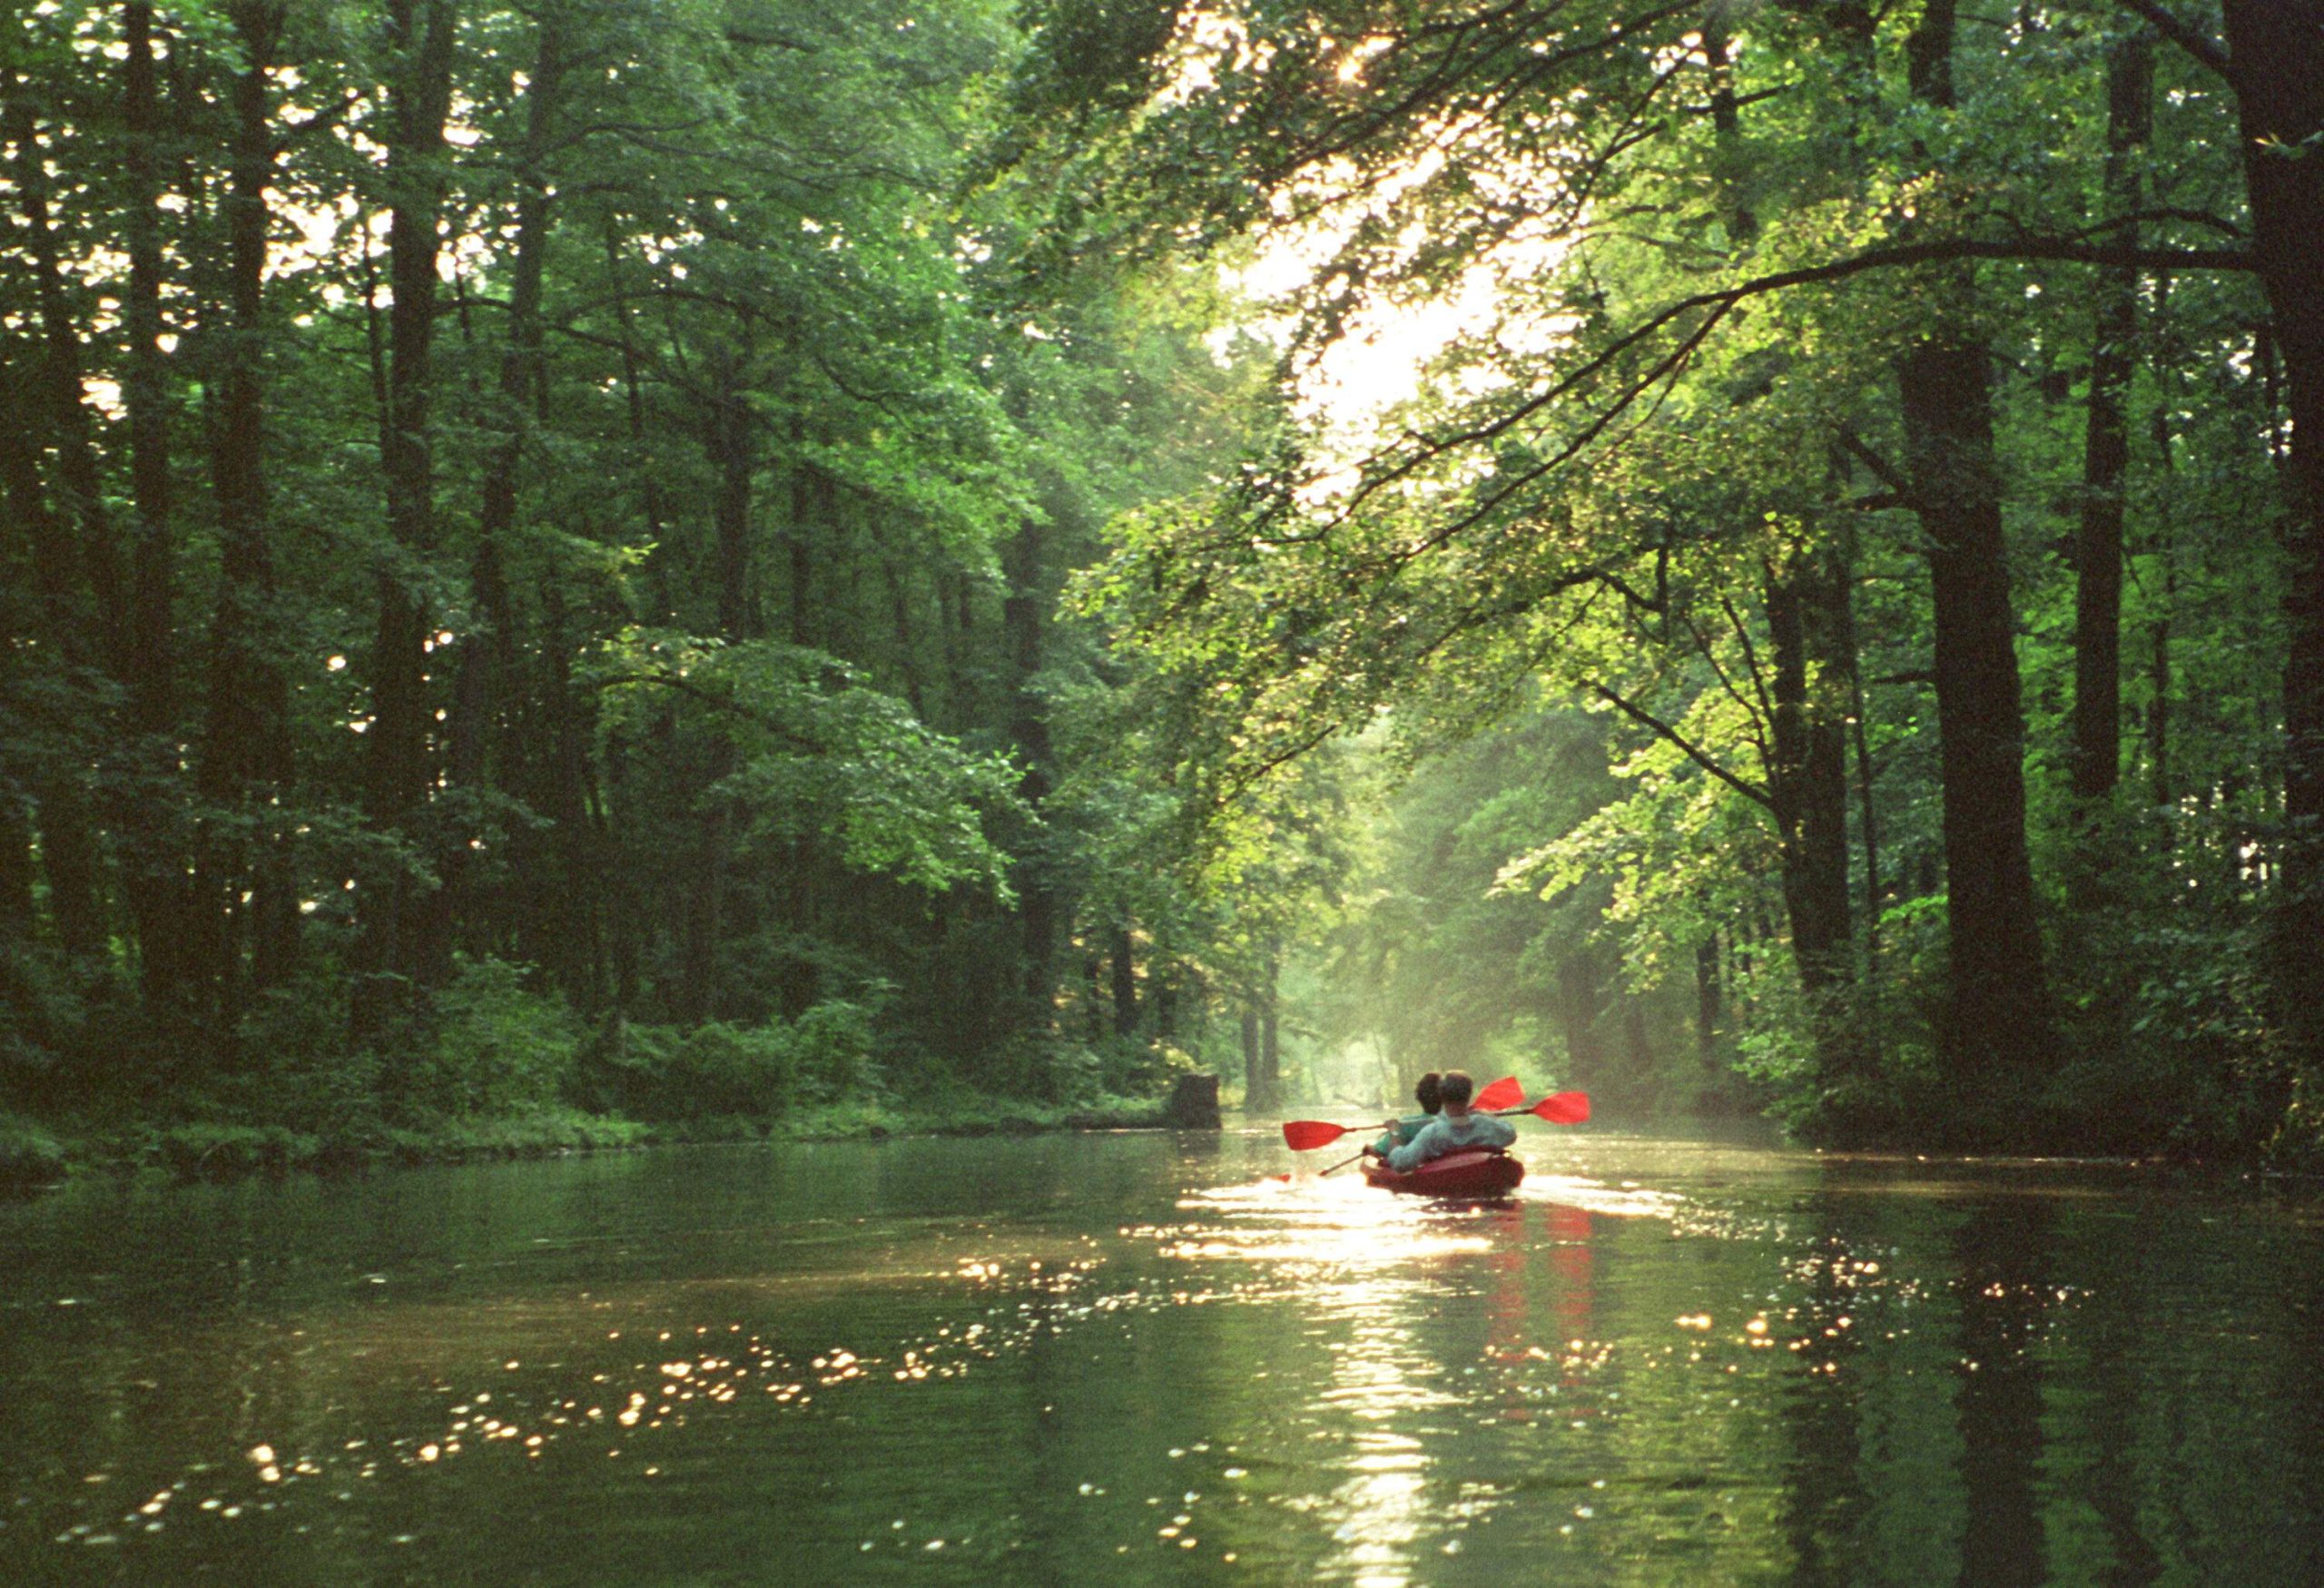 Two people in a red canoe are paddling on a lake lined with tall green trees in a forest.